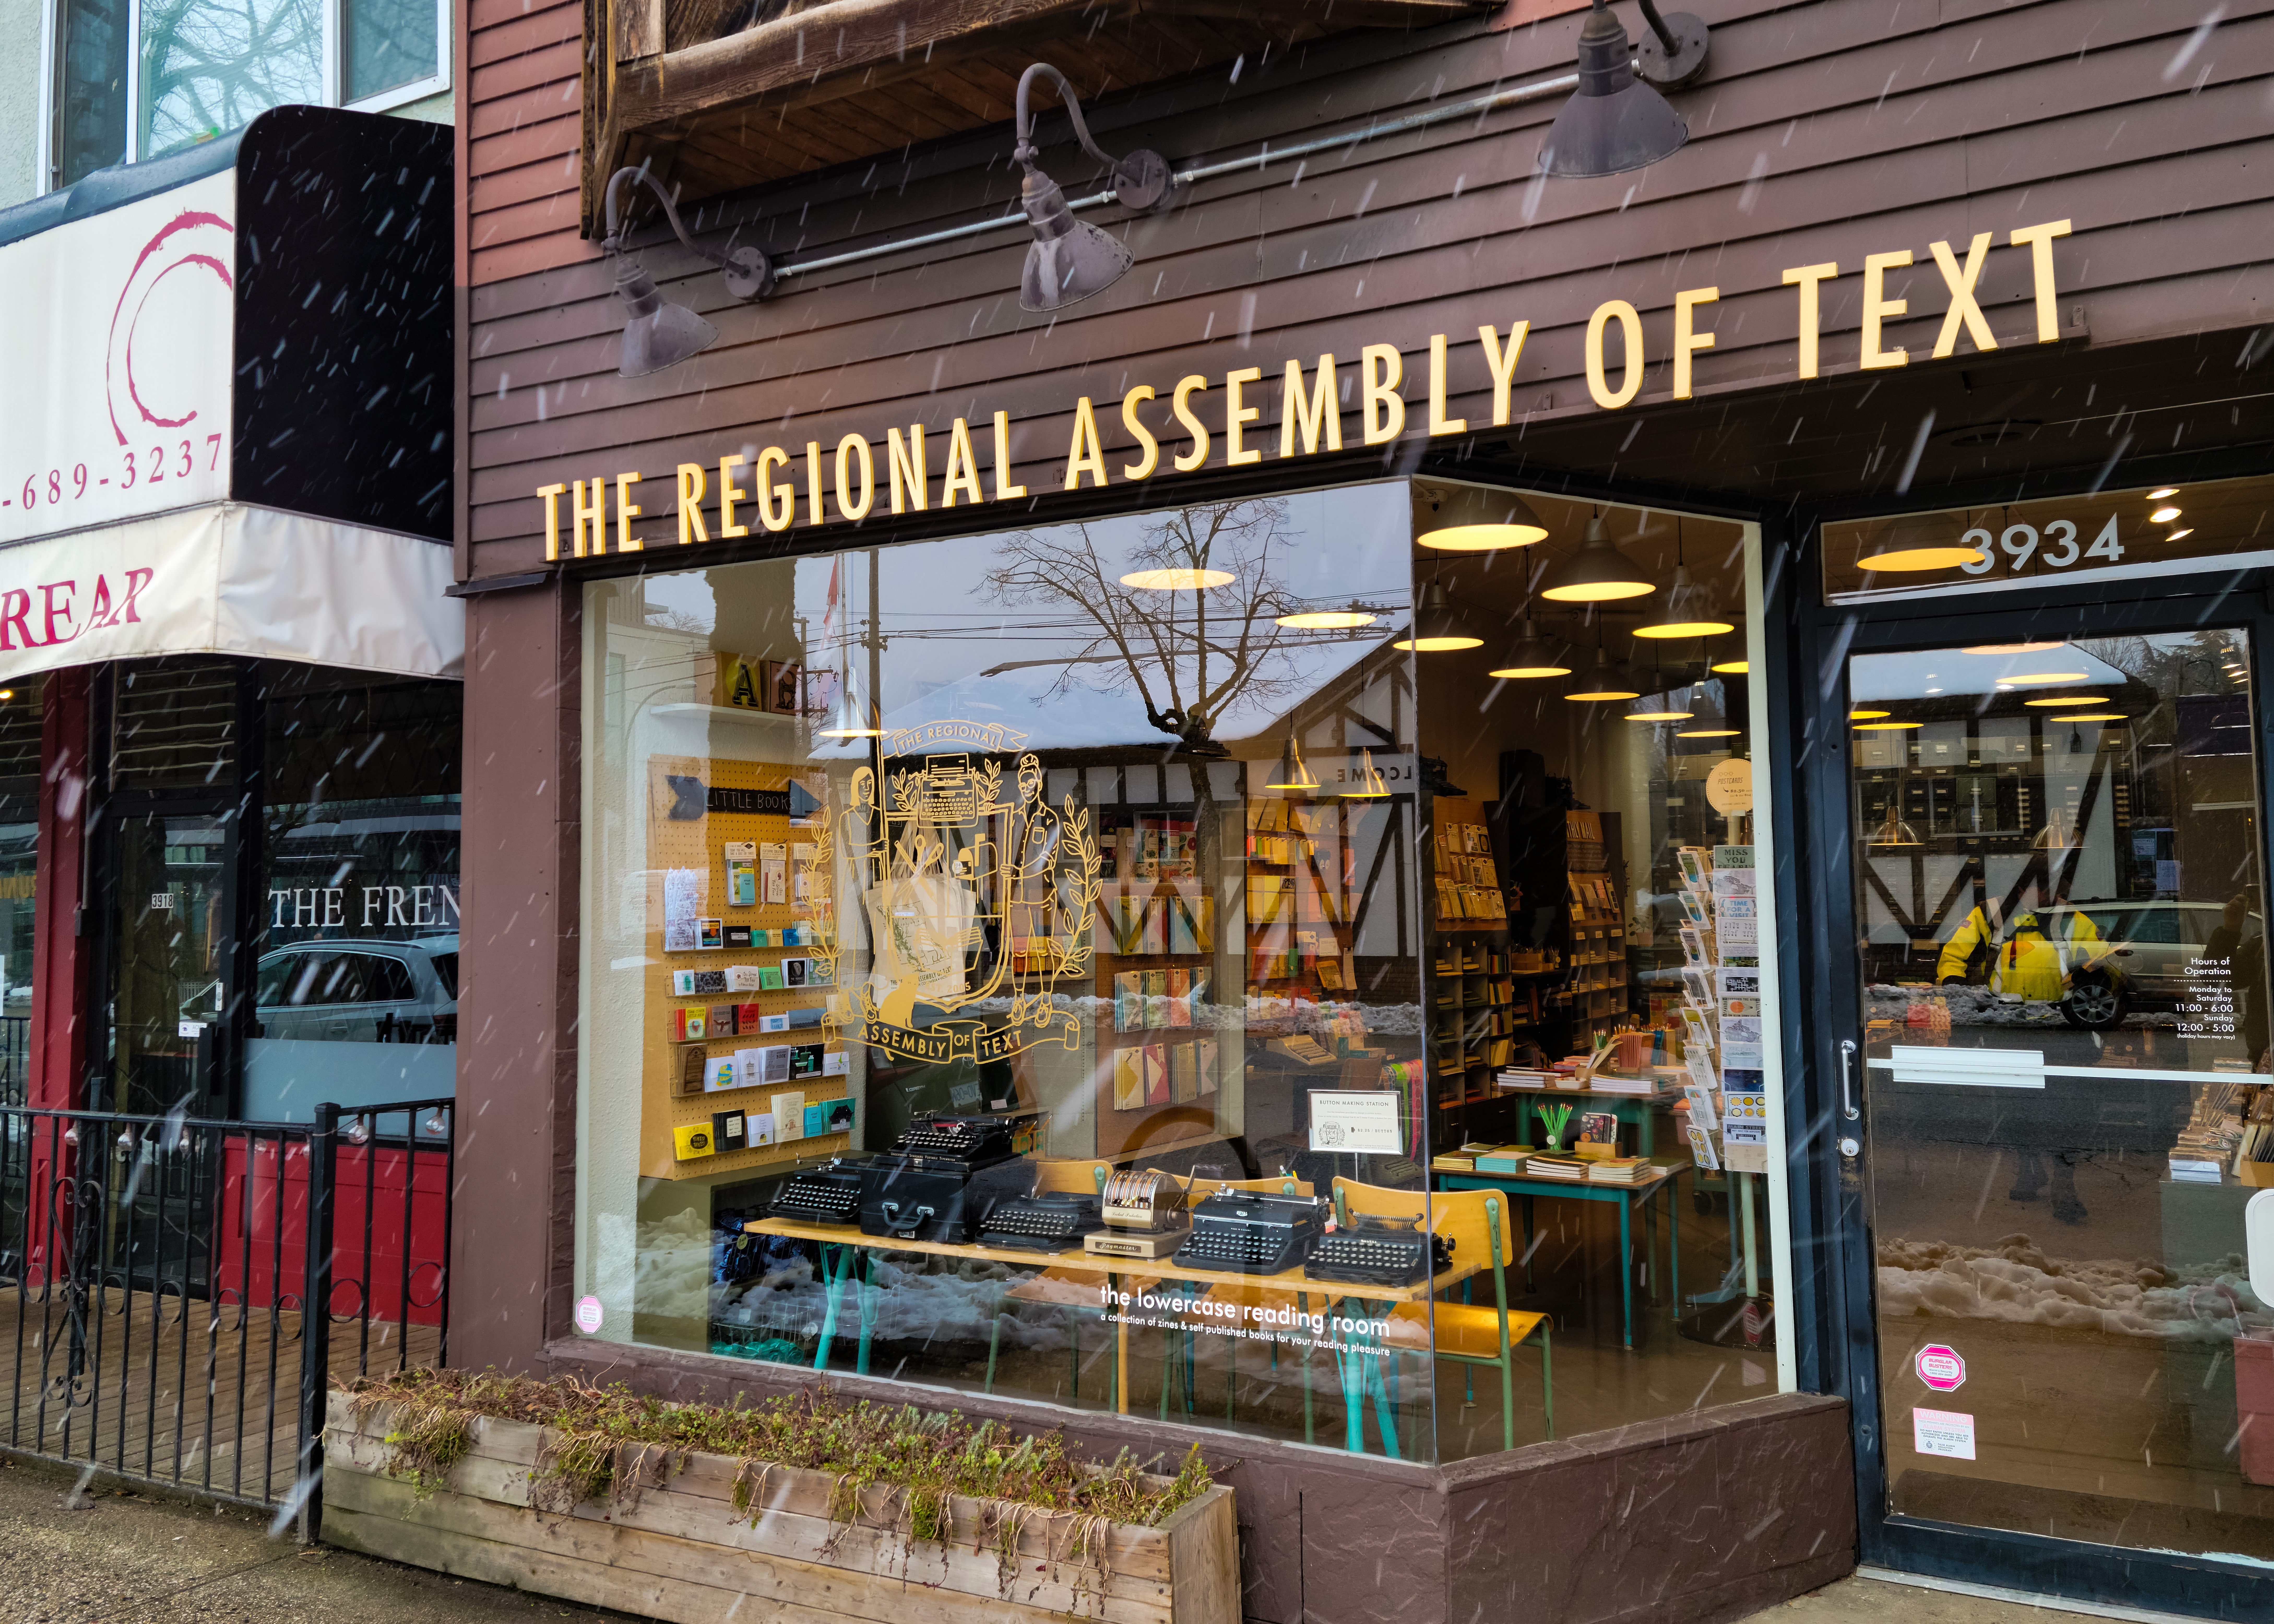 The exterior of a building with chestnut-coloured wooden panels and text sitting above a window that reads “Regional Assembly of Text.” There are snowflakes falling outside and trees reflected in the window. There are various typewriters in the display window.